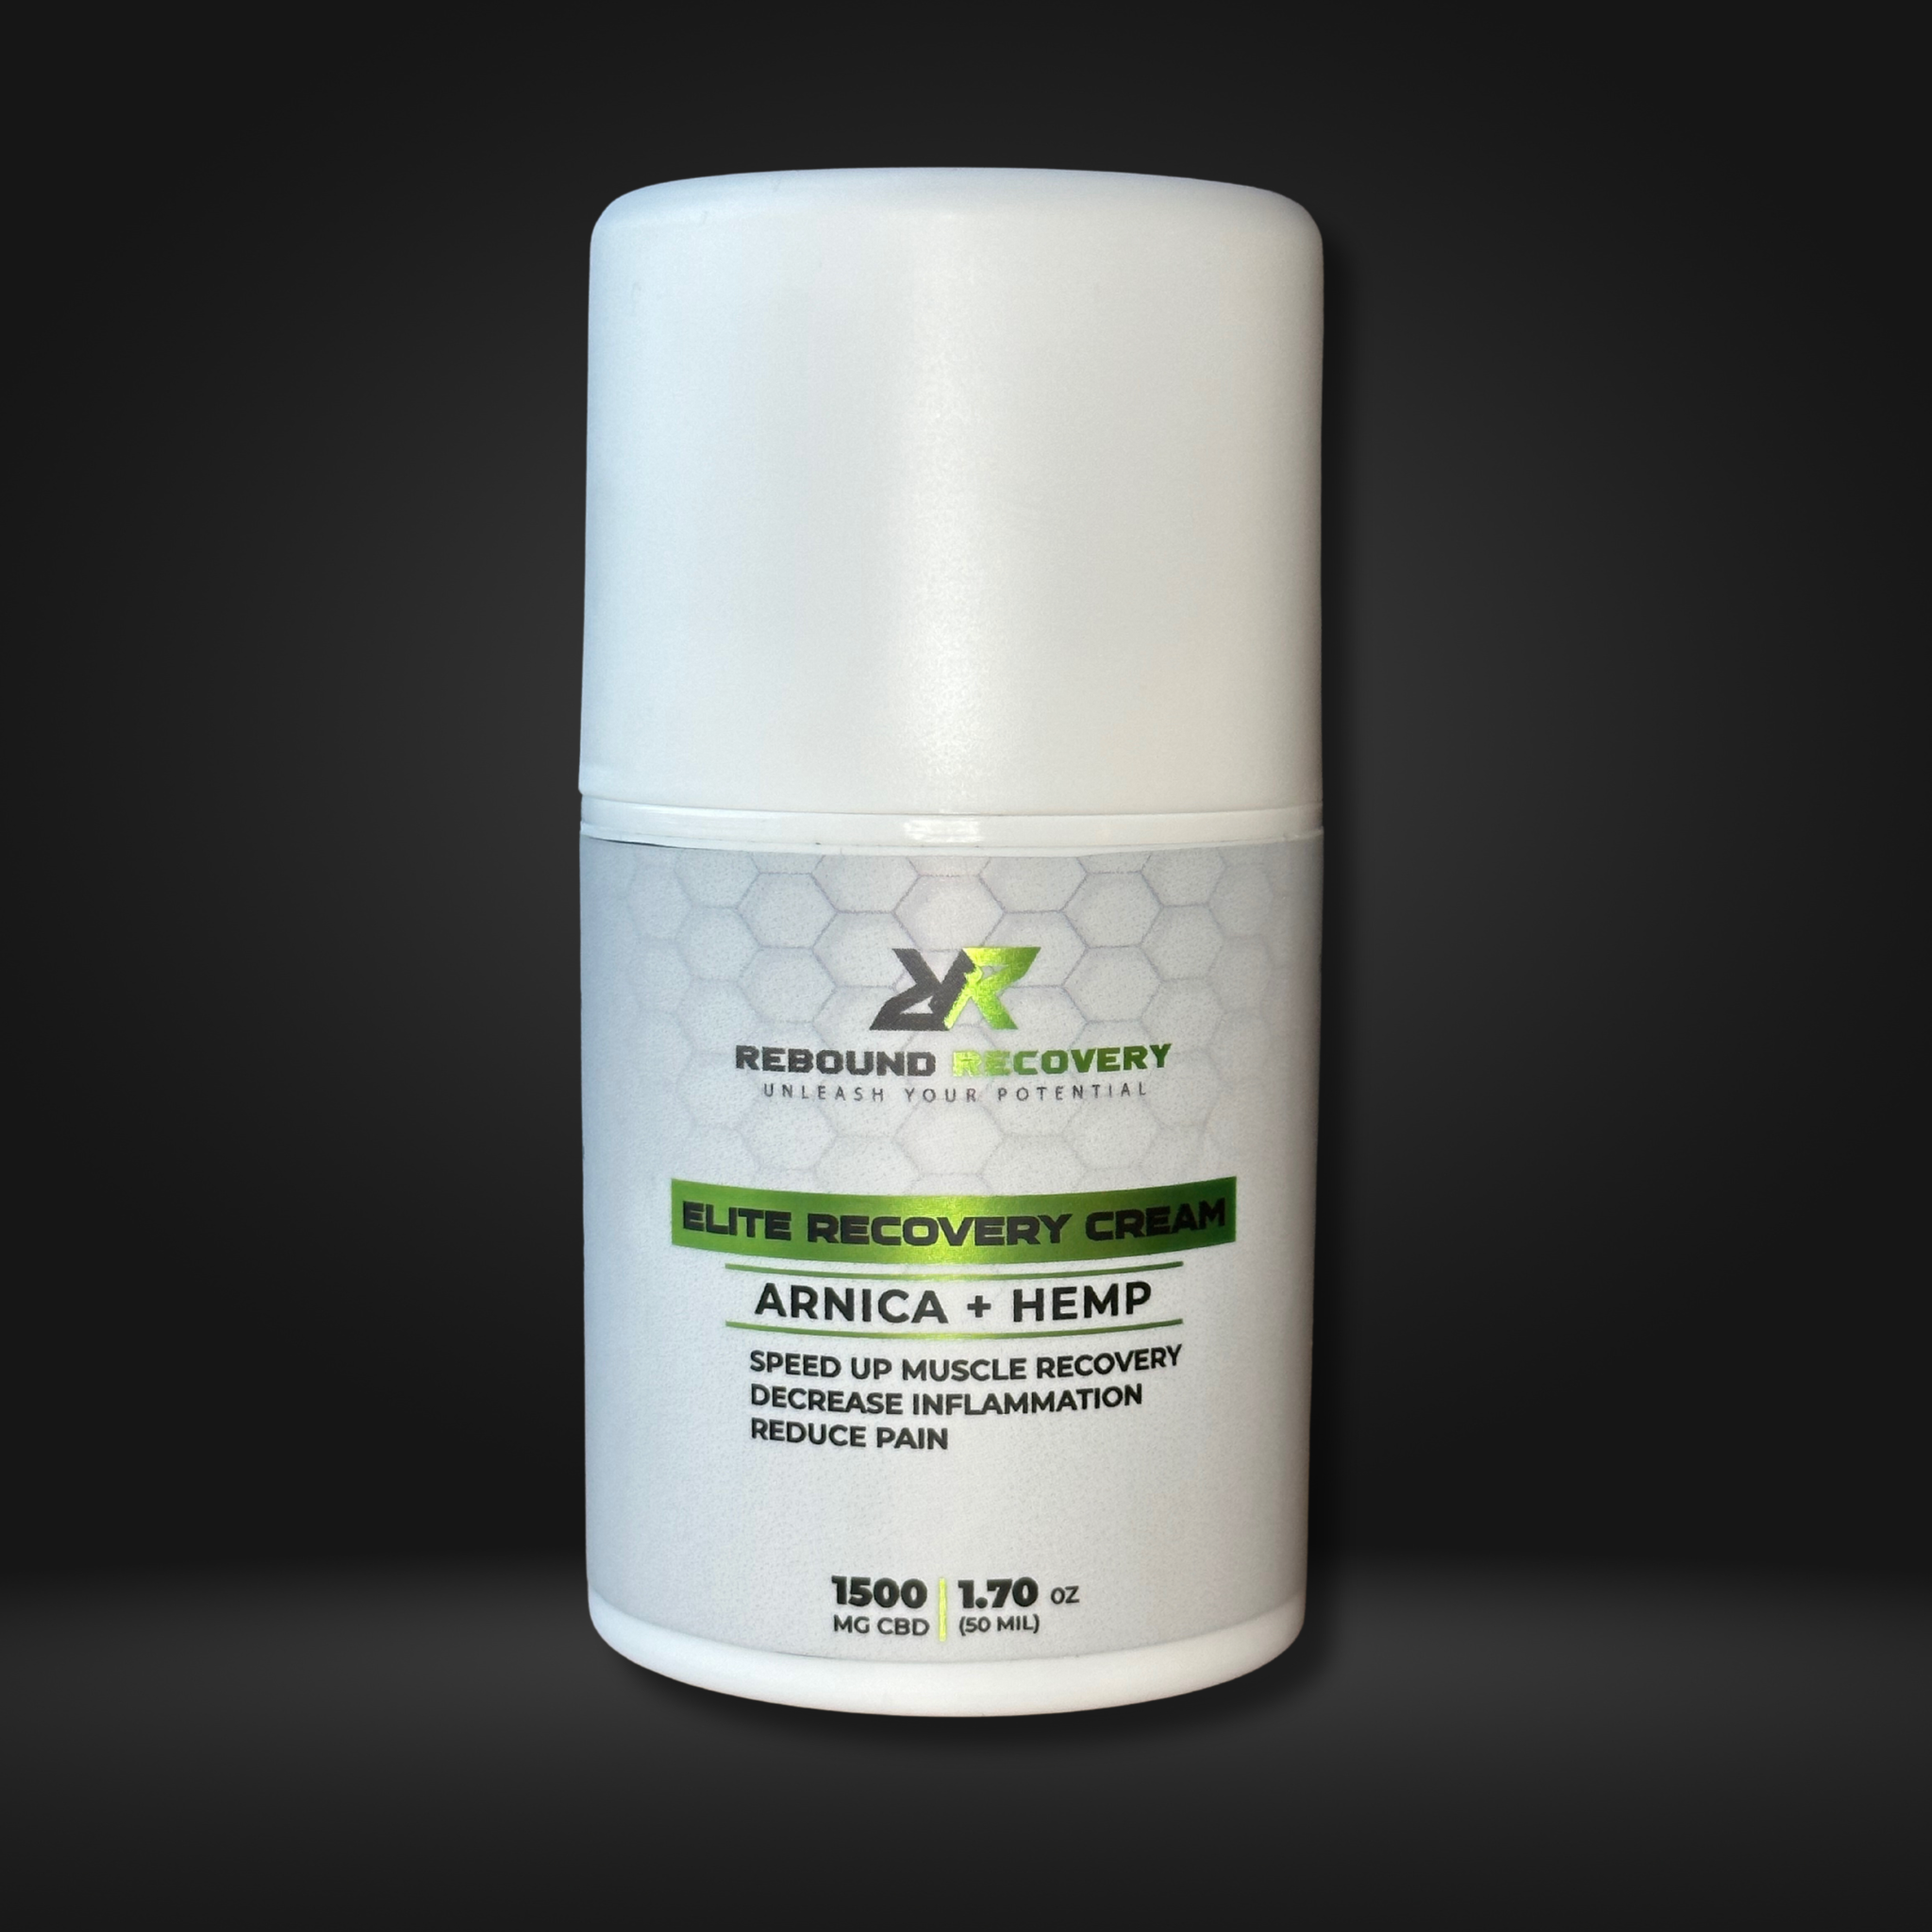 Natural muscle pain relief and recovery topical, Elite Recovery Cream by Rebound Recovery.